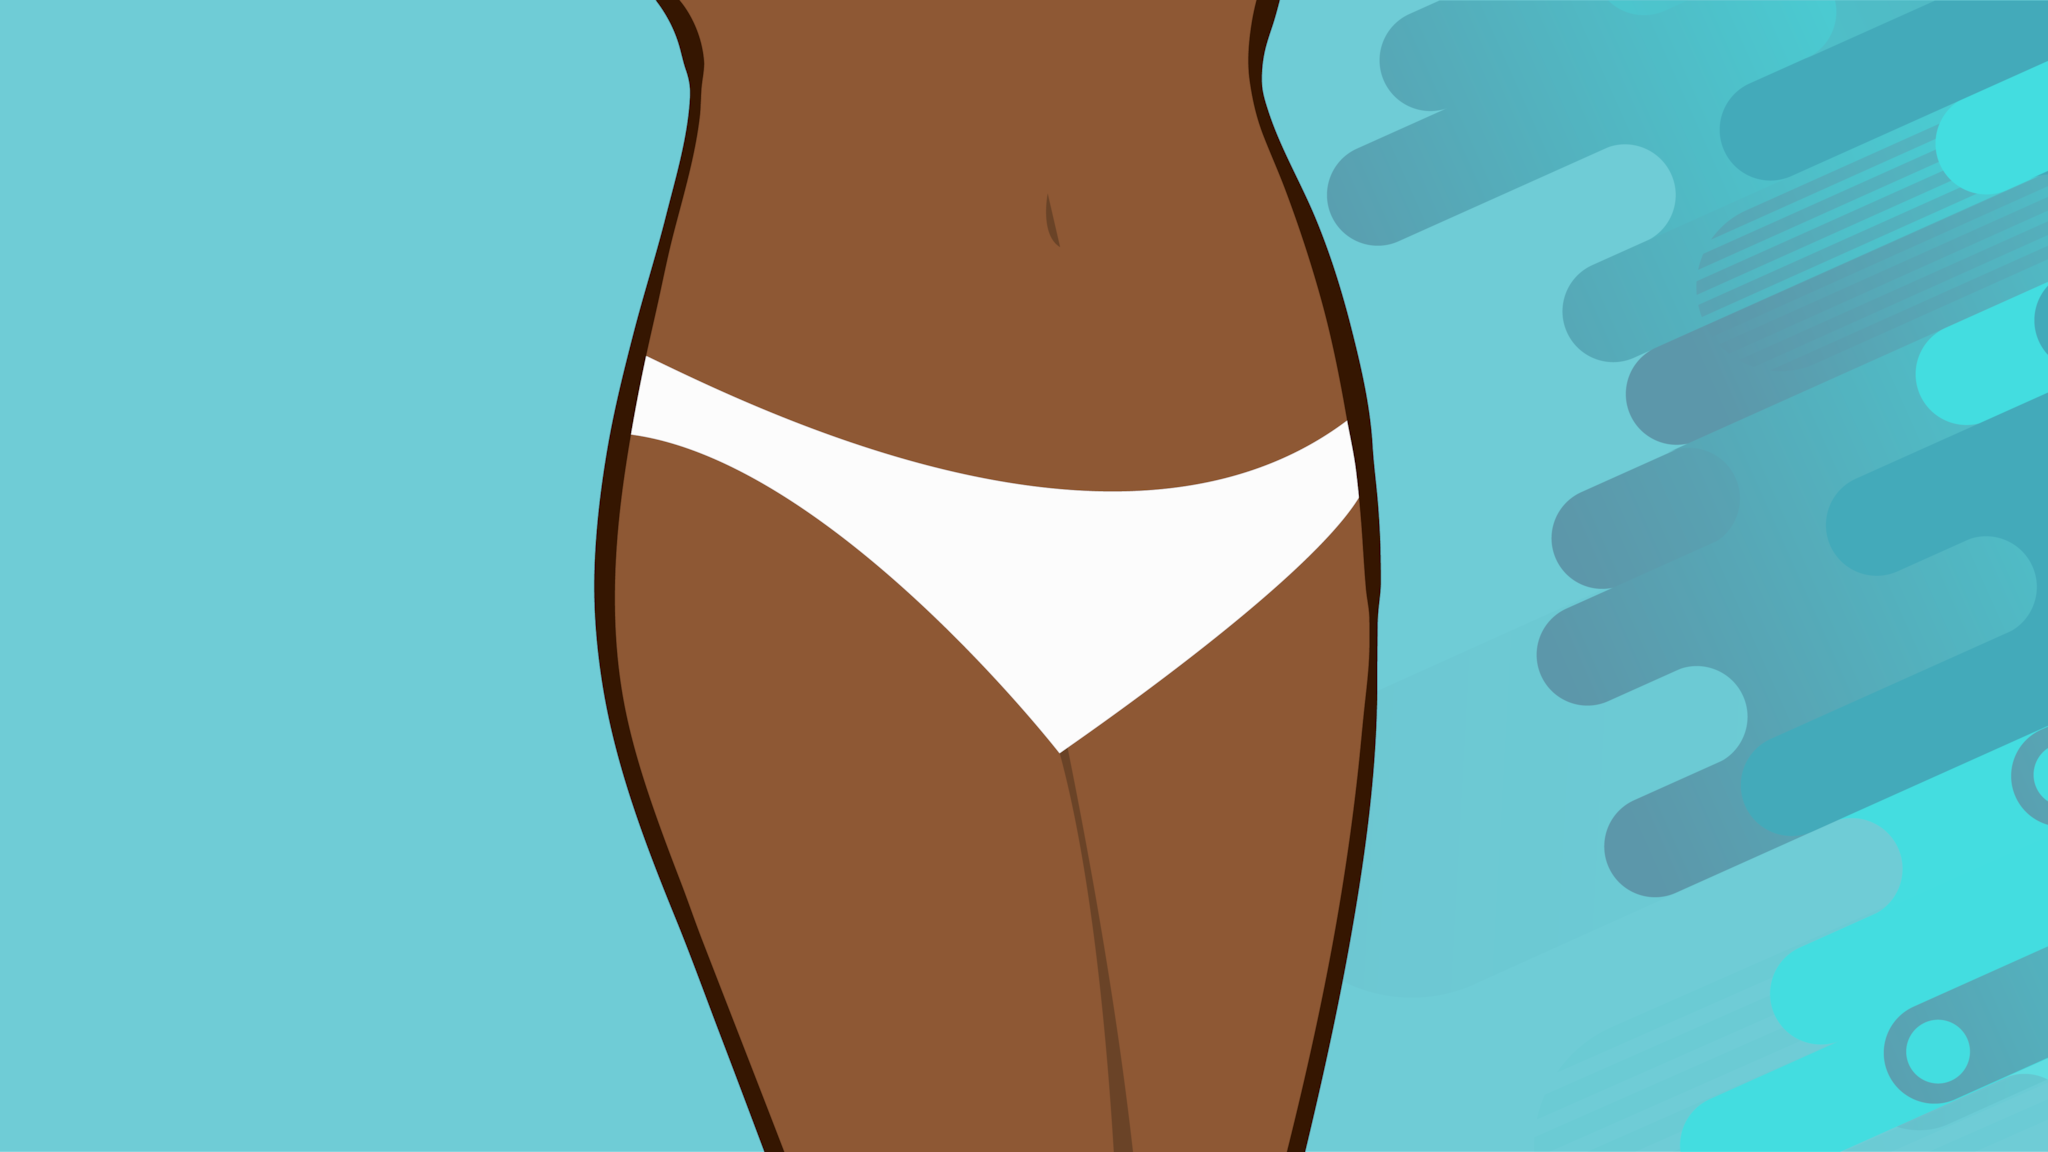 Cartoon depiction of a person's lower body, wearing a white cotton underwear.